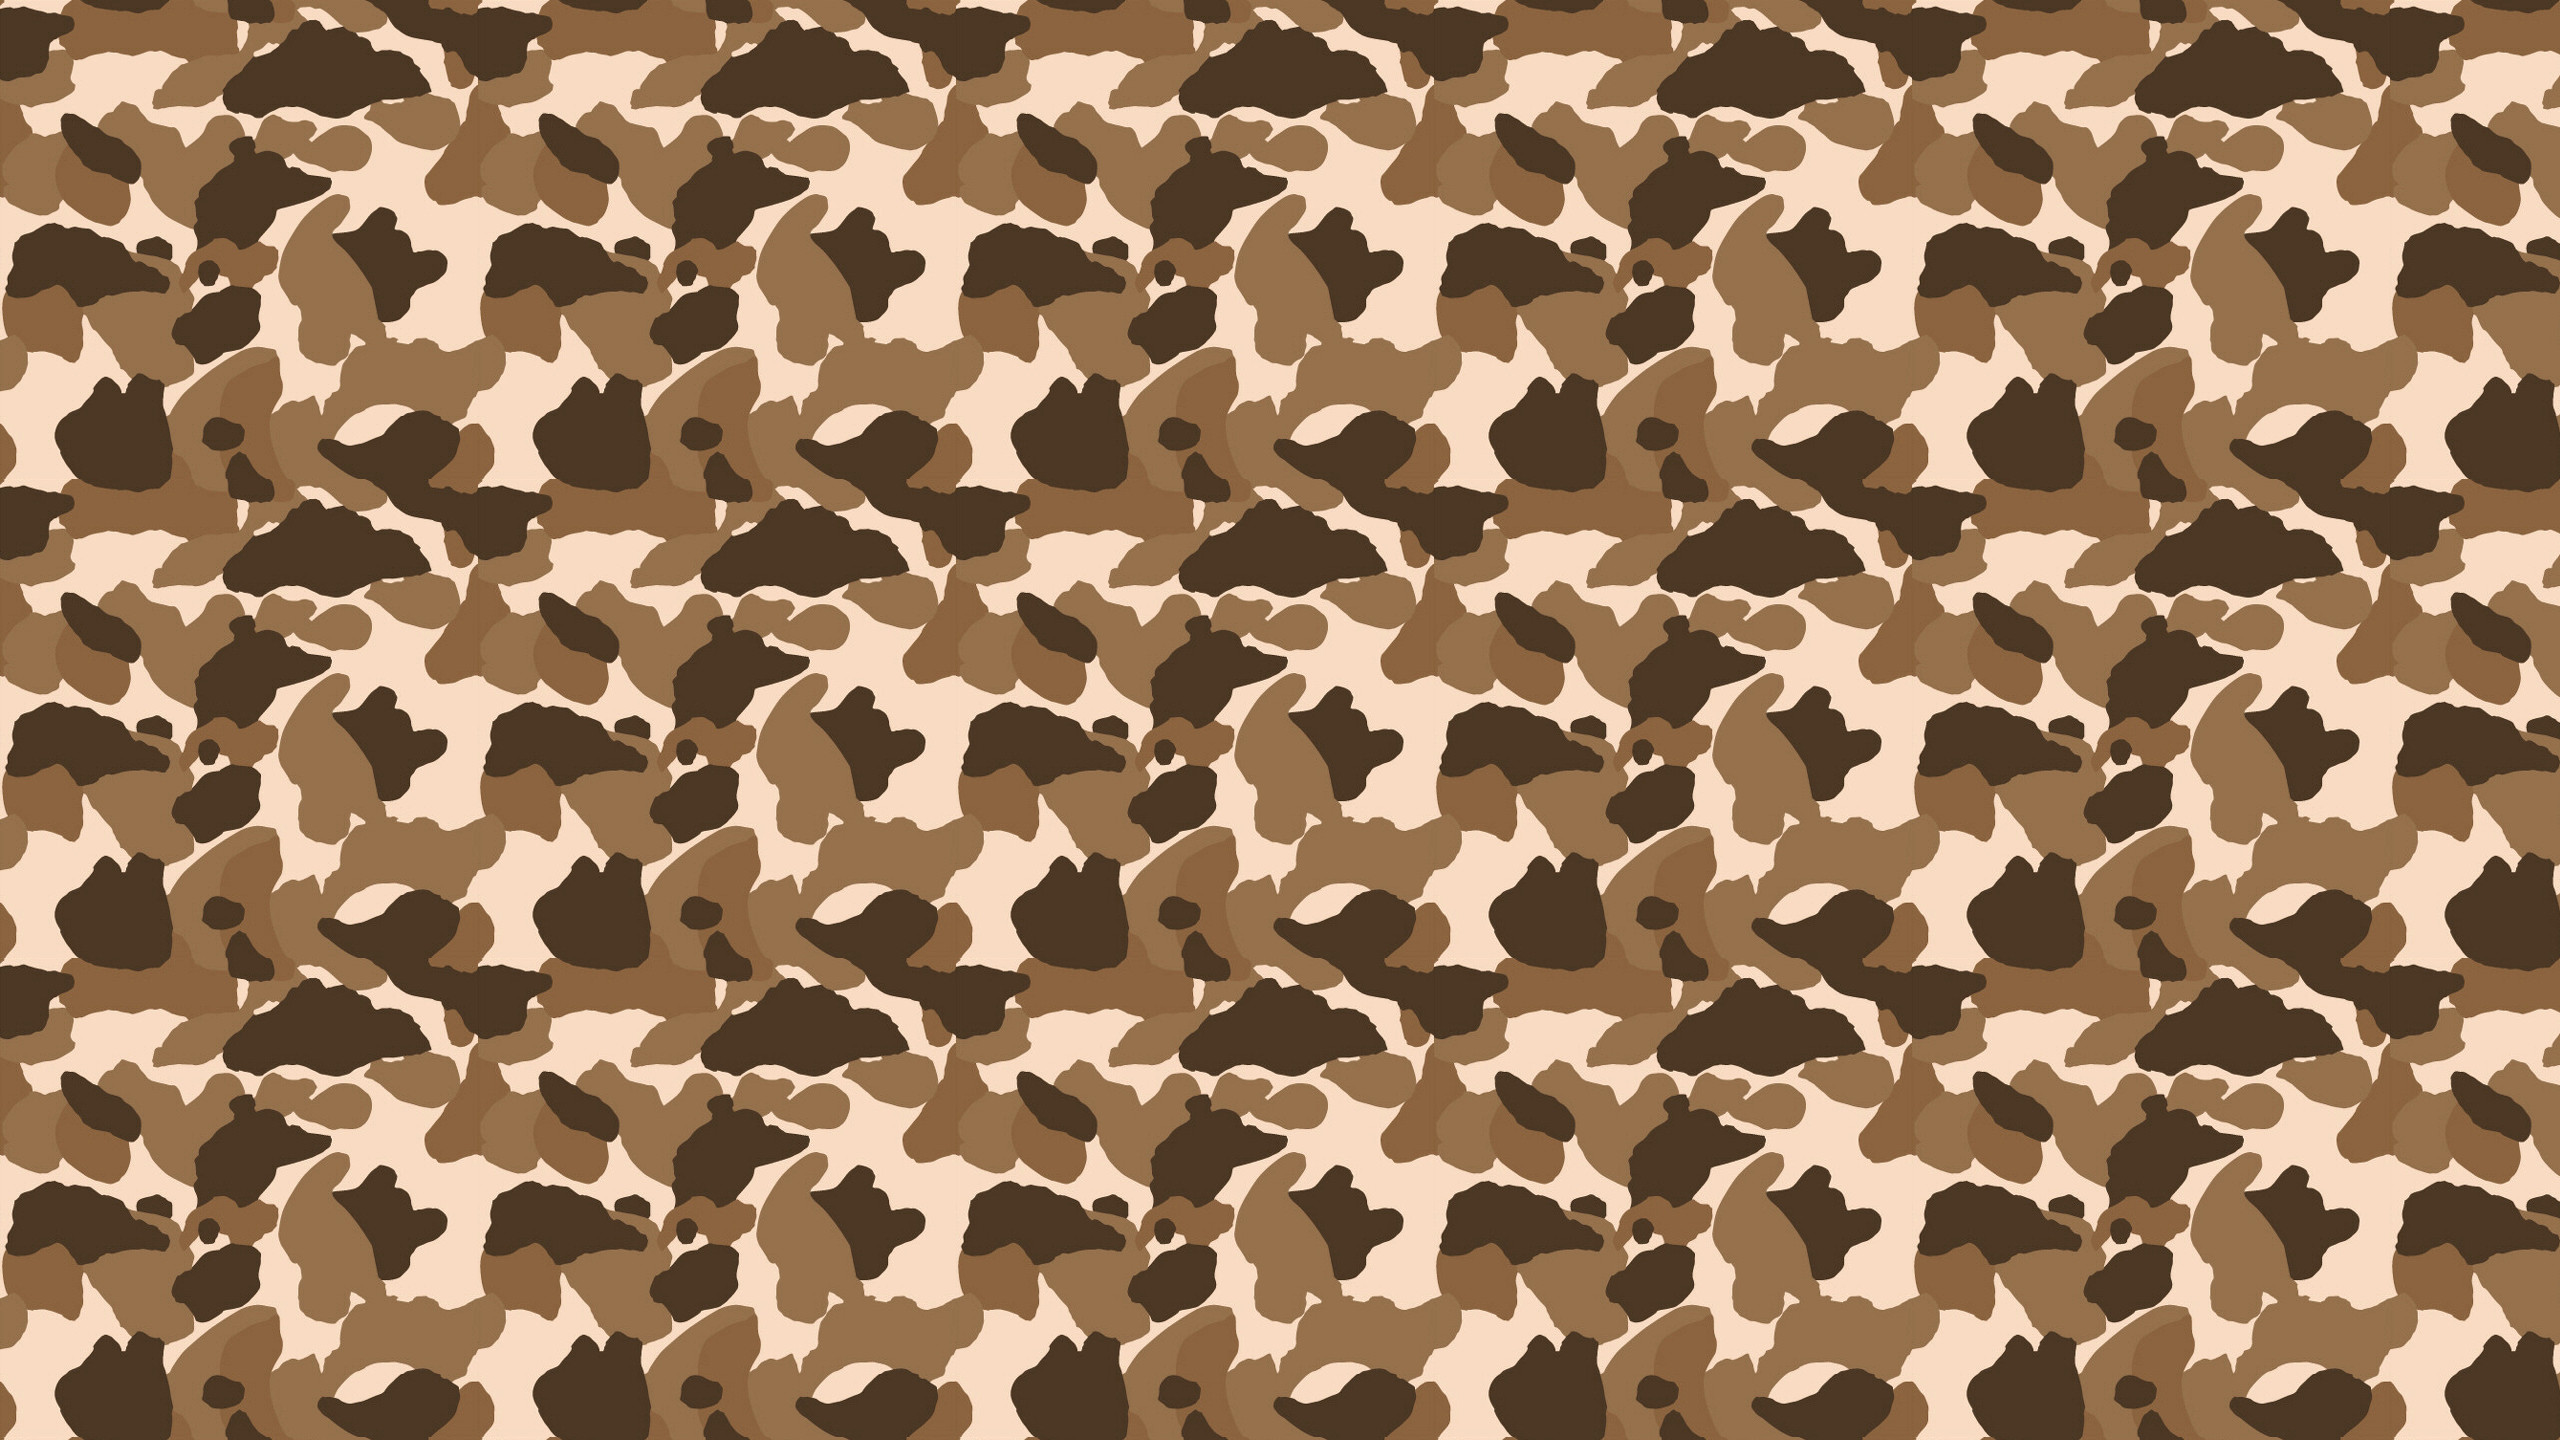 This Brown Camo Desktop Wallpaper is easy. Just save the wallpaper